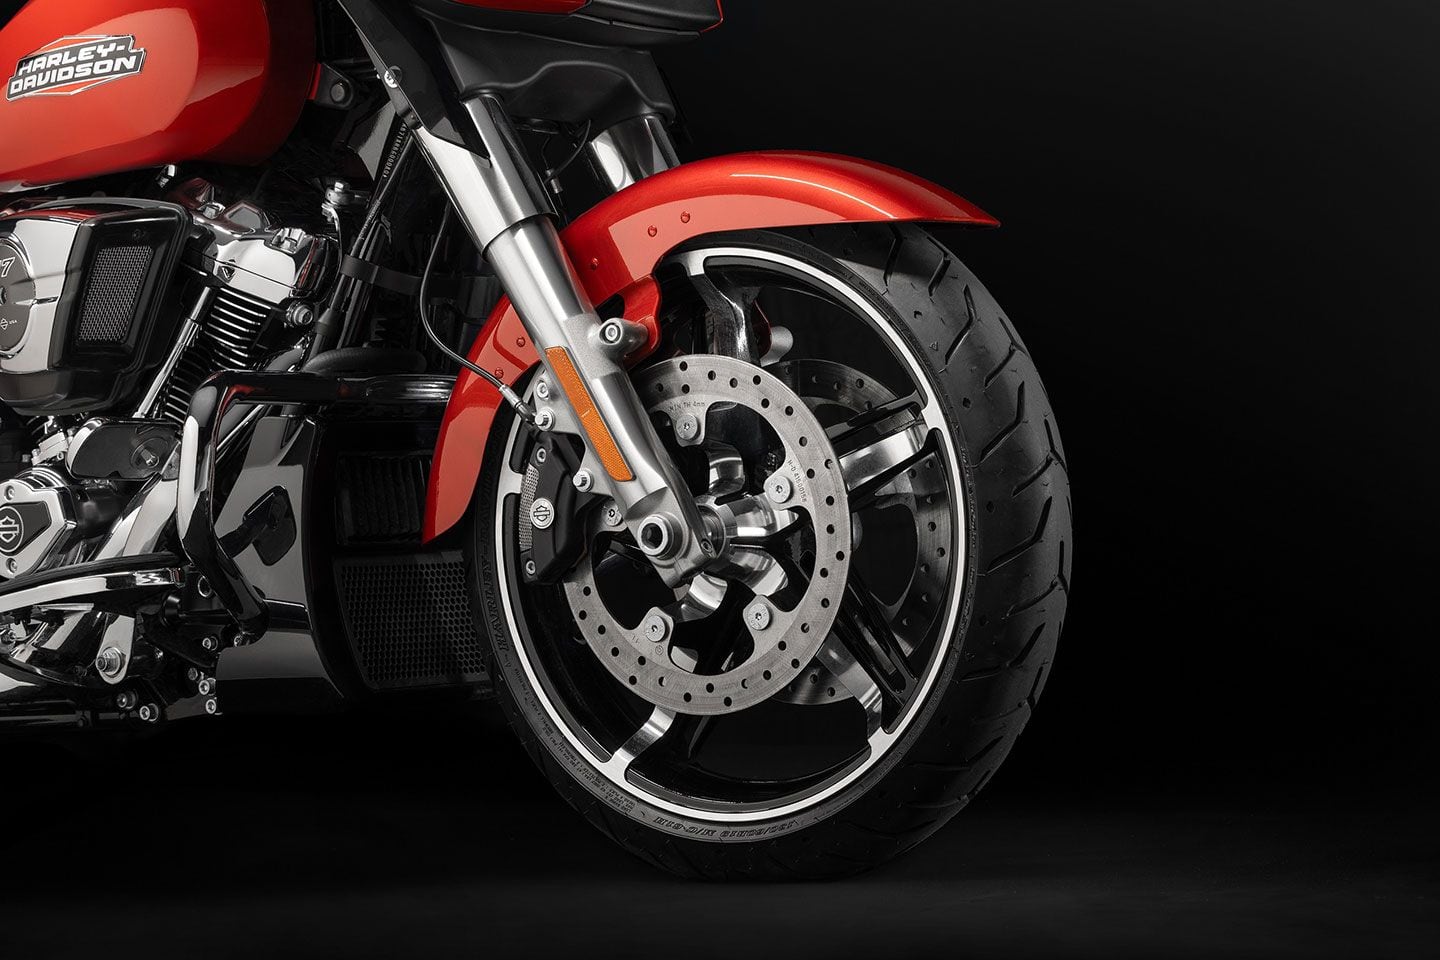 A 49mm Showa Dual Bending Valve fork is good for 4.6 inches of travel. Upgraded Brembo brake components feature larger 320mm discs up front on the 19-inch cast wheel.